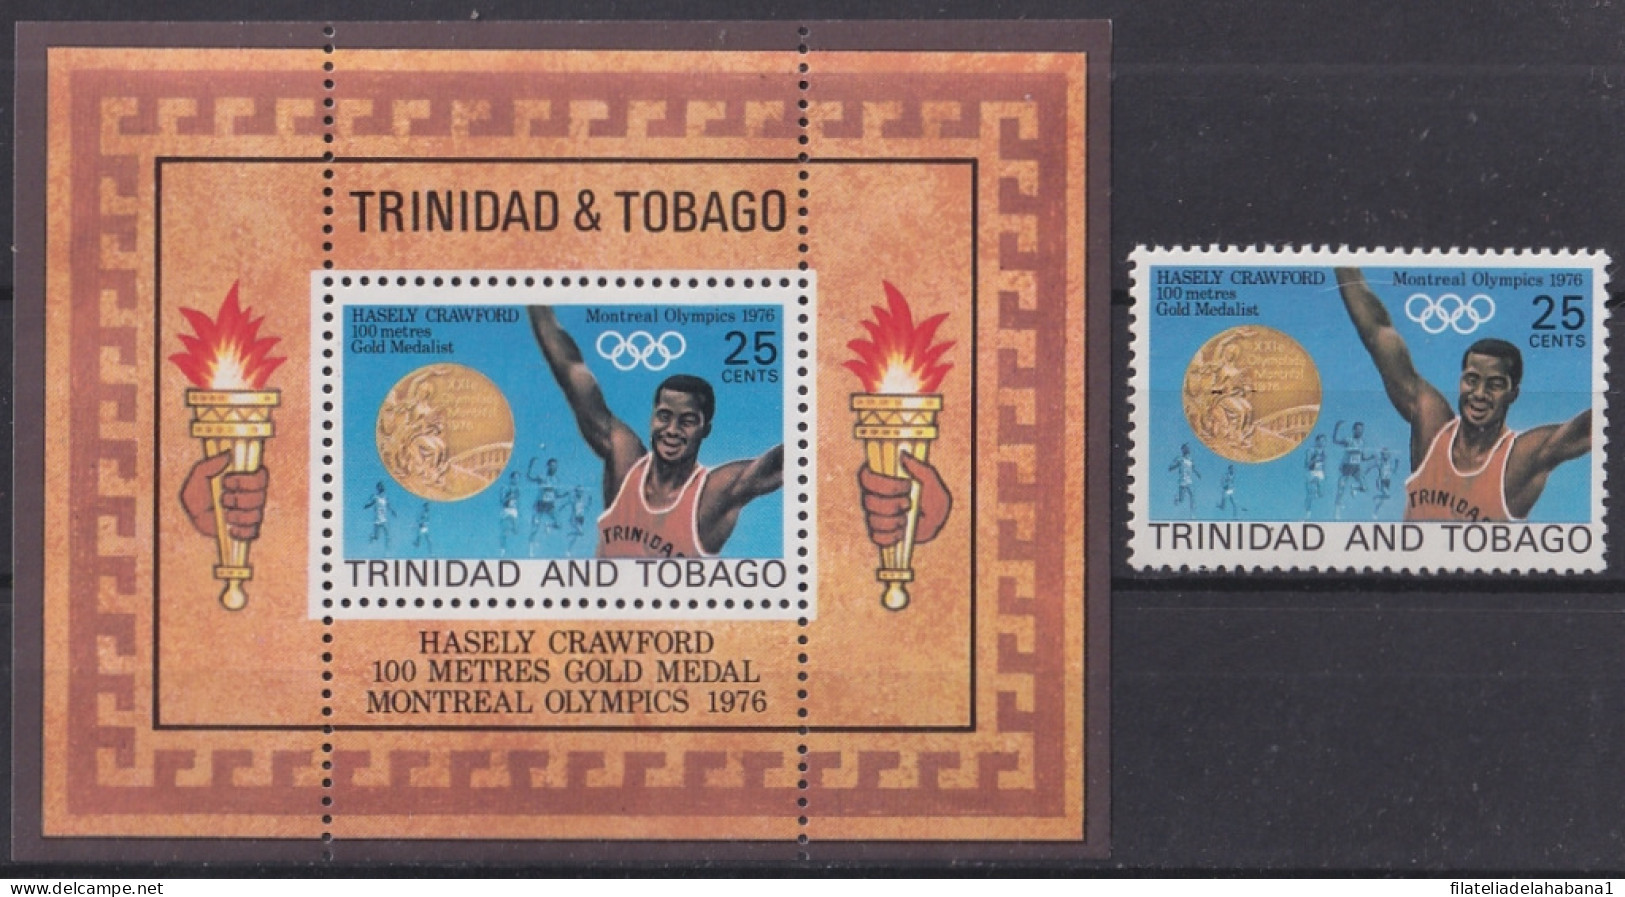 F-EX47644 TRINIDAD & TOBAGO MNH 1977 MONTREAL OLYMPIC GAMES ATHLETISM WINNER HASELY CRAWFORD.  - Ete 1976: Montréal